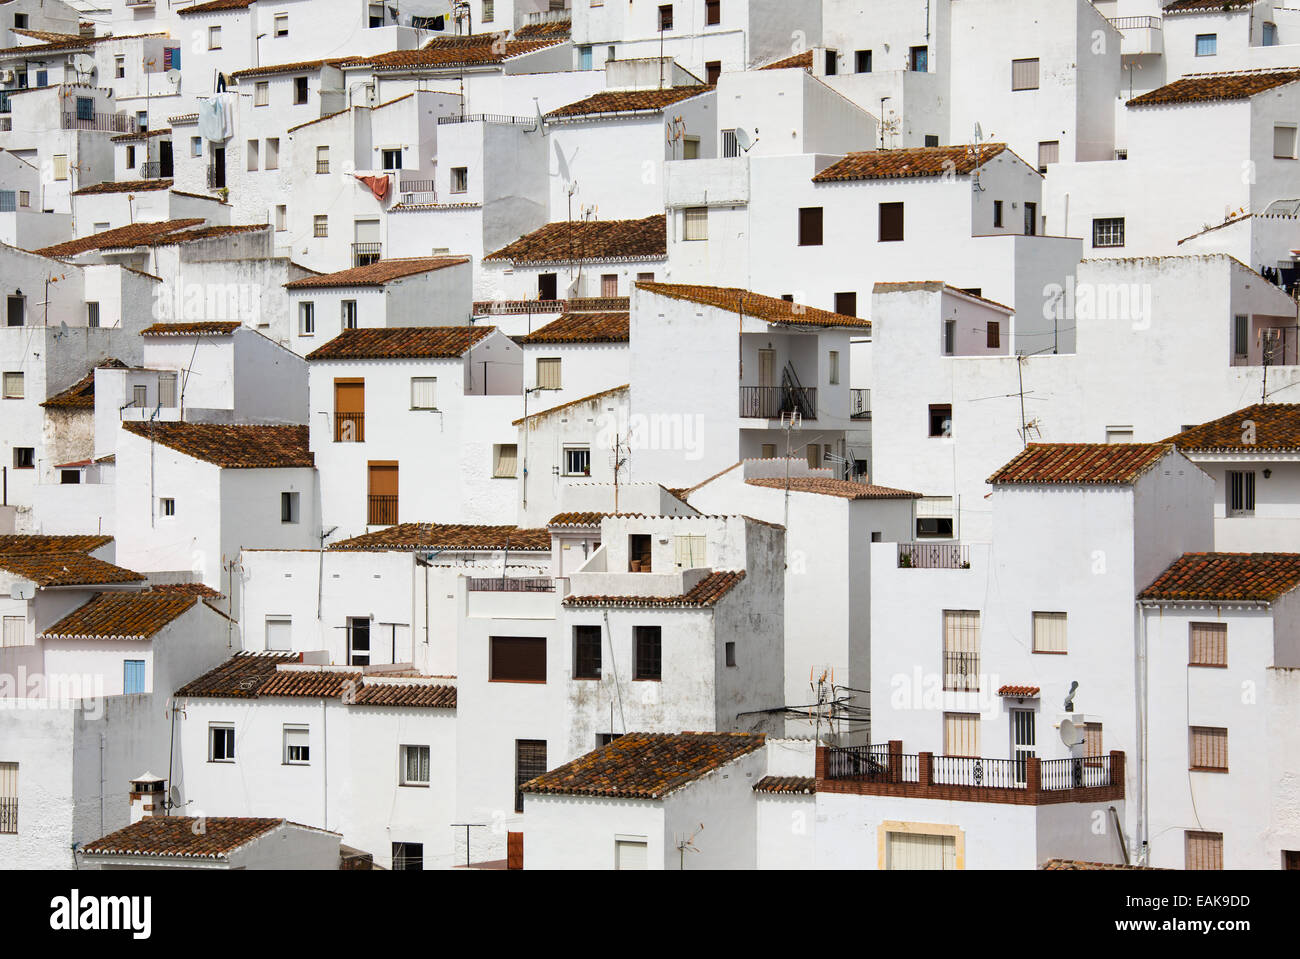 Whitewashed village of Casares, Casares, Málaga province, Andalusia, Spain Stock Photo